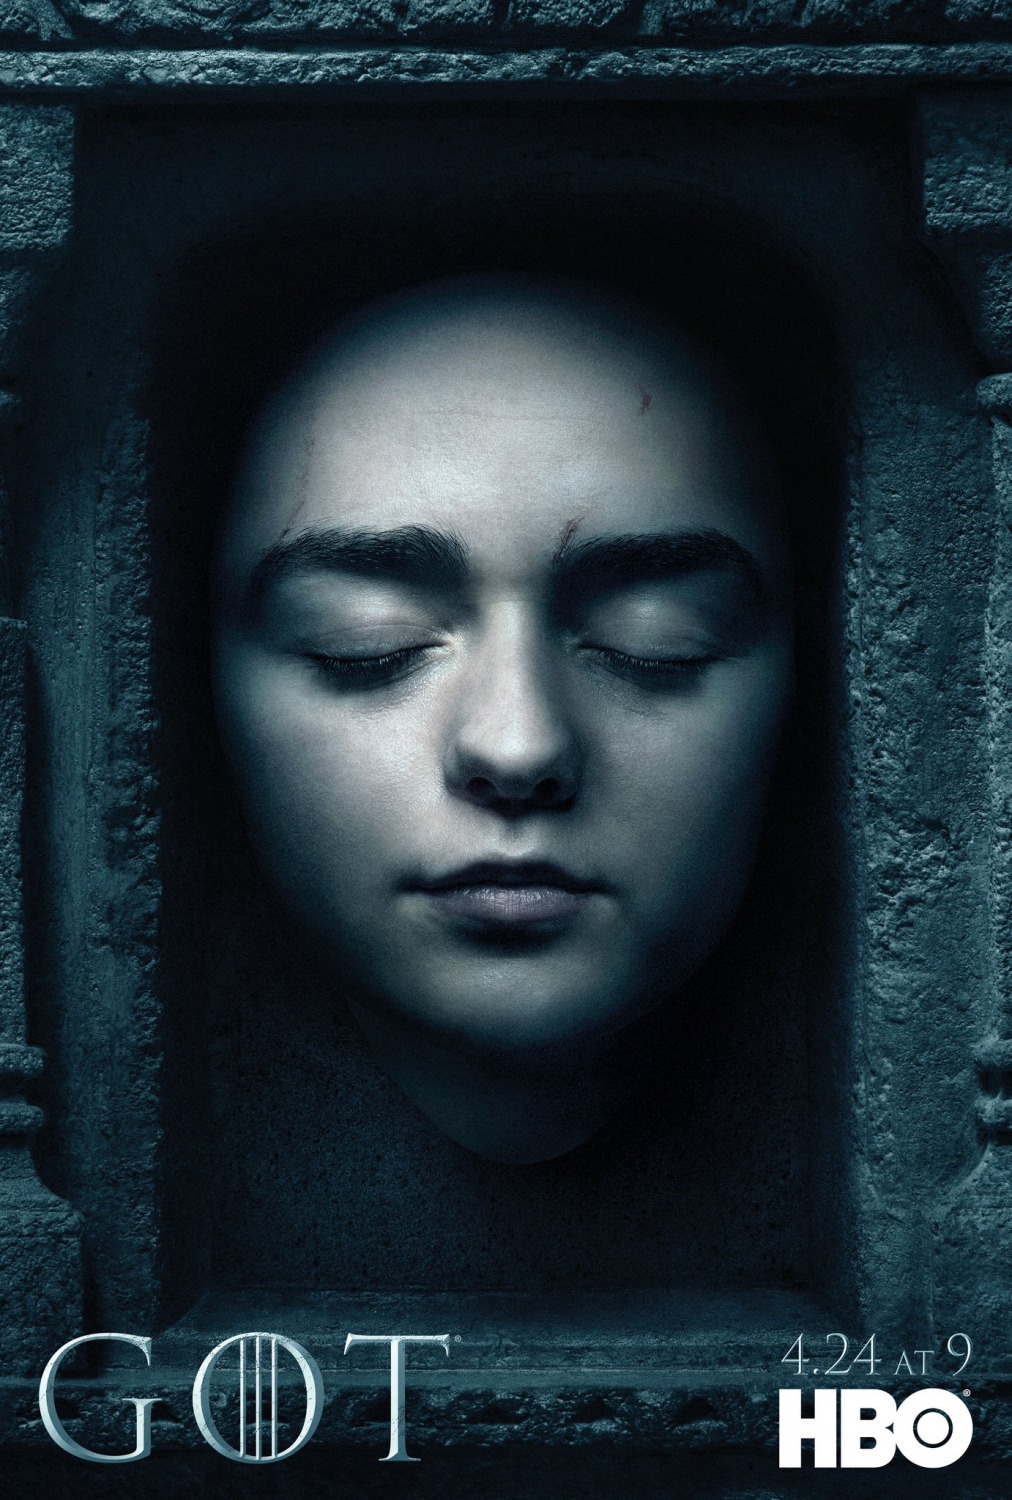 Extra Large TV Poster Image for Game of Thrones (#63 of 125)